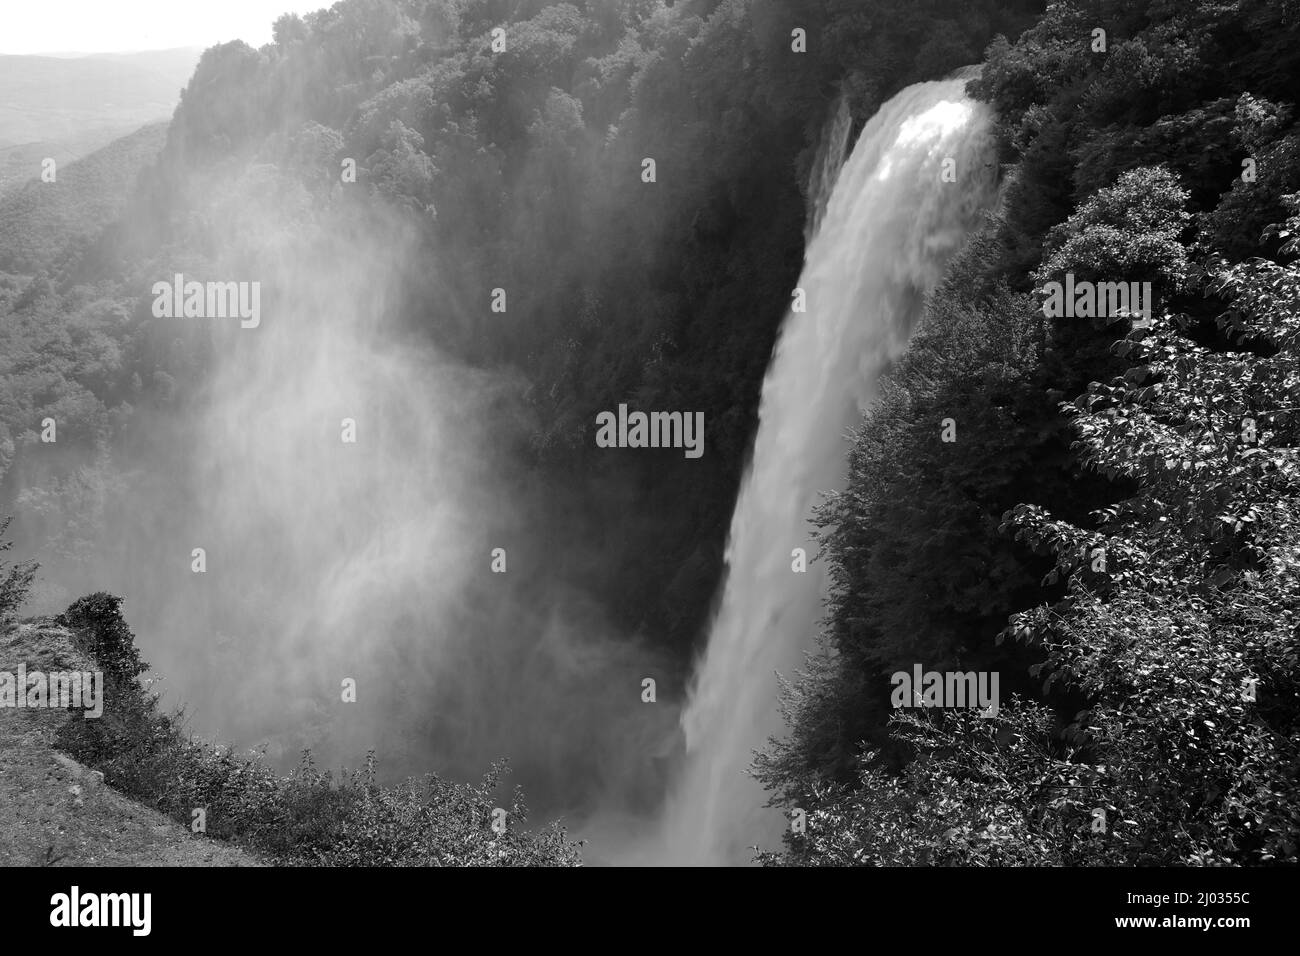 Top view of Marmore waterfall, in Umbria, central Italy Stock Photo